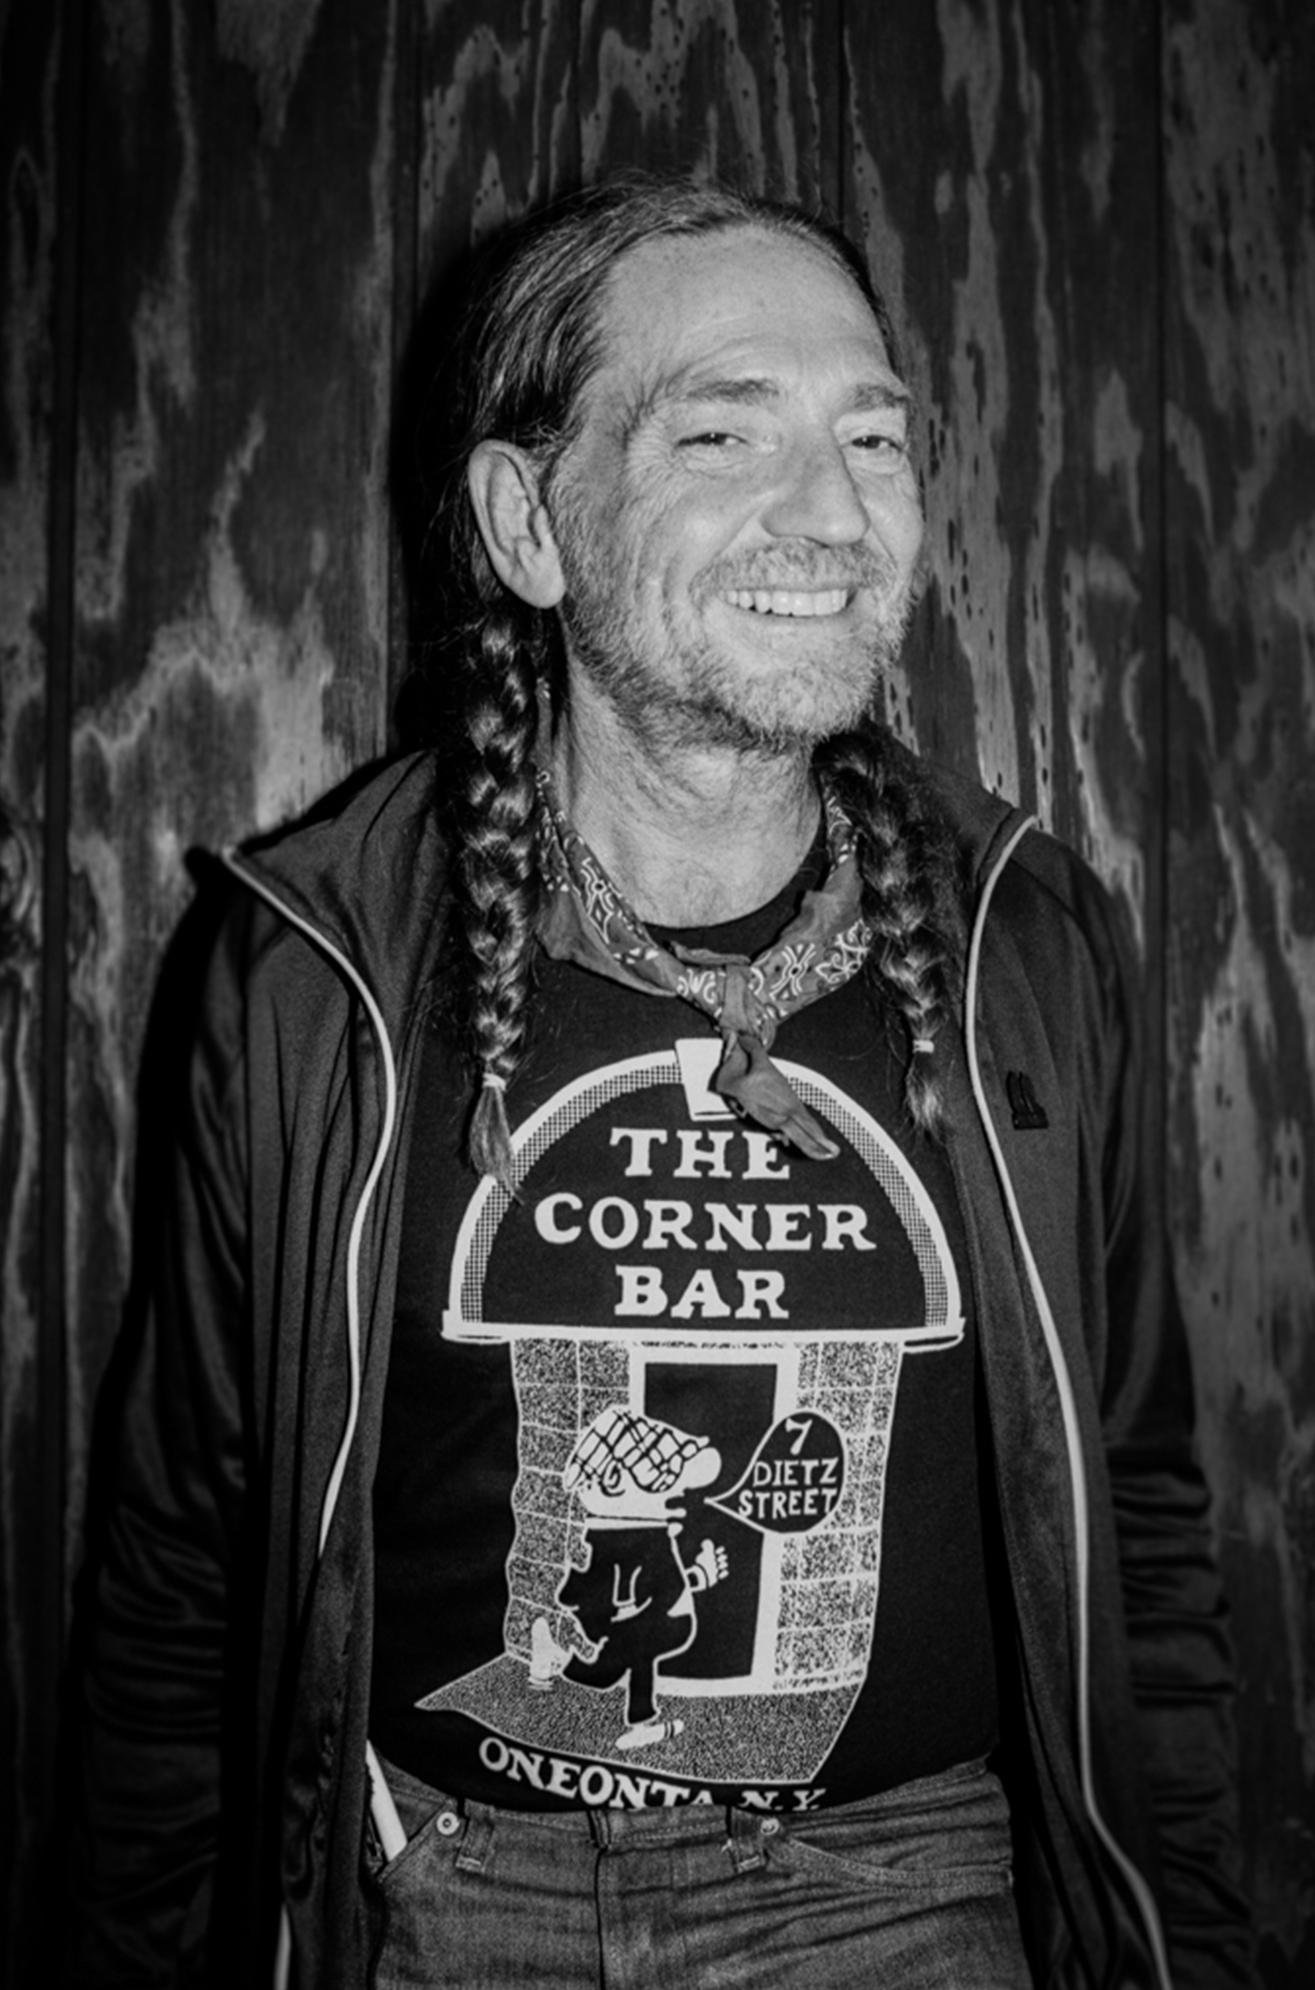 Signed limited edition 16x20"" print of Willie Nelson taken in 1978 by Lynn Goldsmith.

Limited edition number 4/20

Modern C-type print. Available for immediate shipping.

Lynn Goldsmith has documented over five decades of American culture,